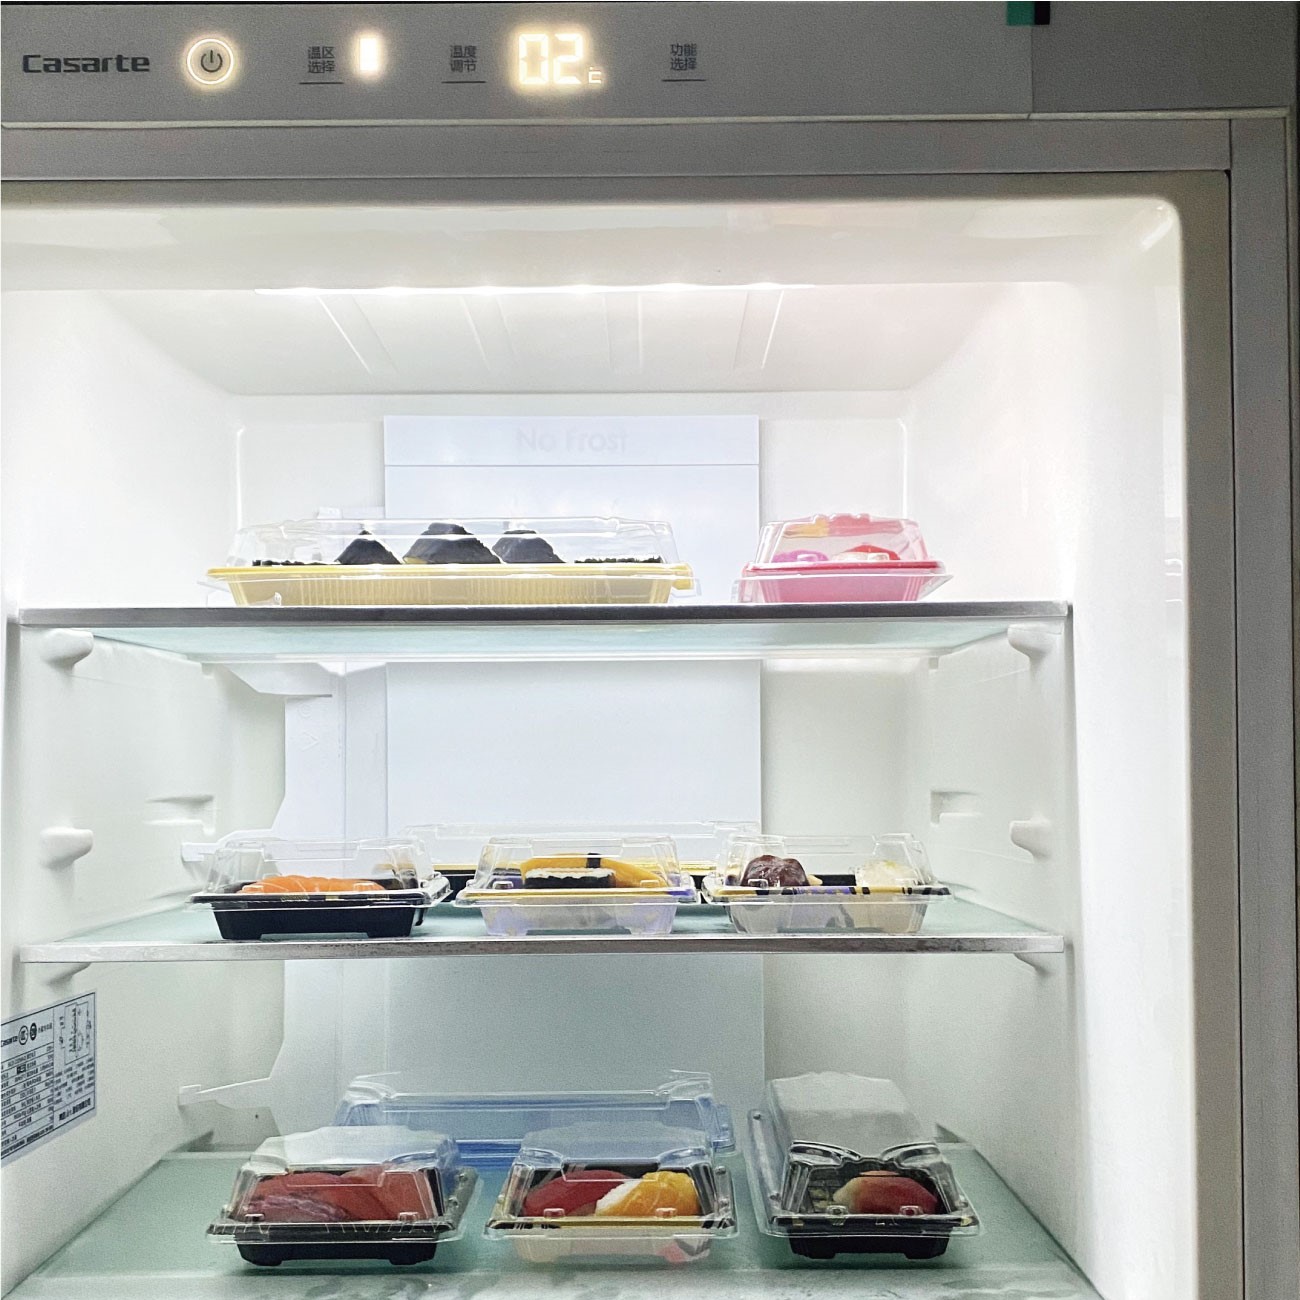 There are some sushi plates WL-11 in the refrigerator, which can be used for refrigeration.